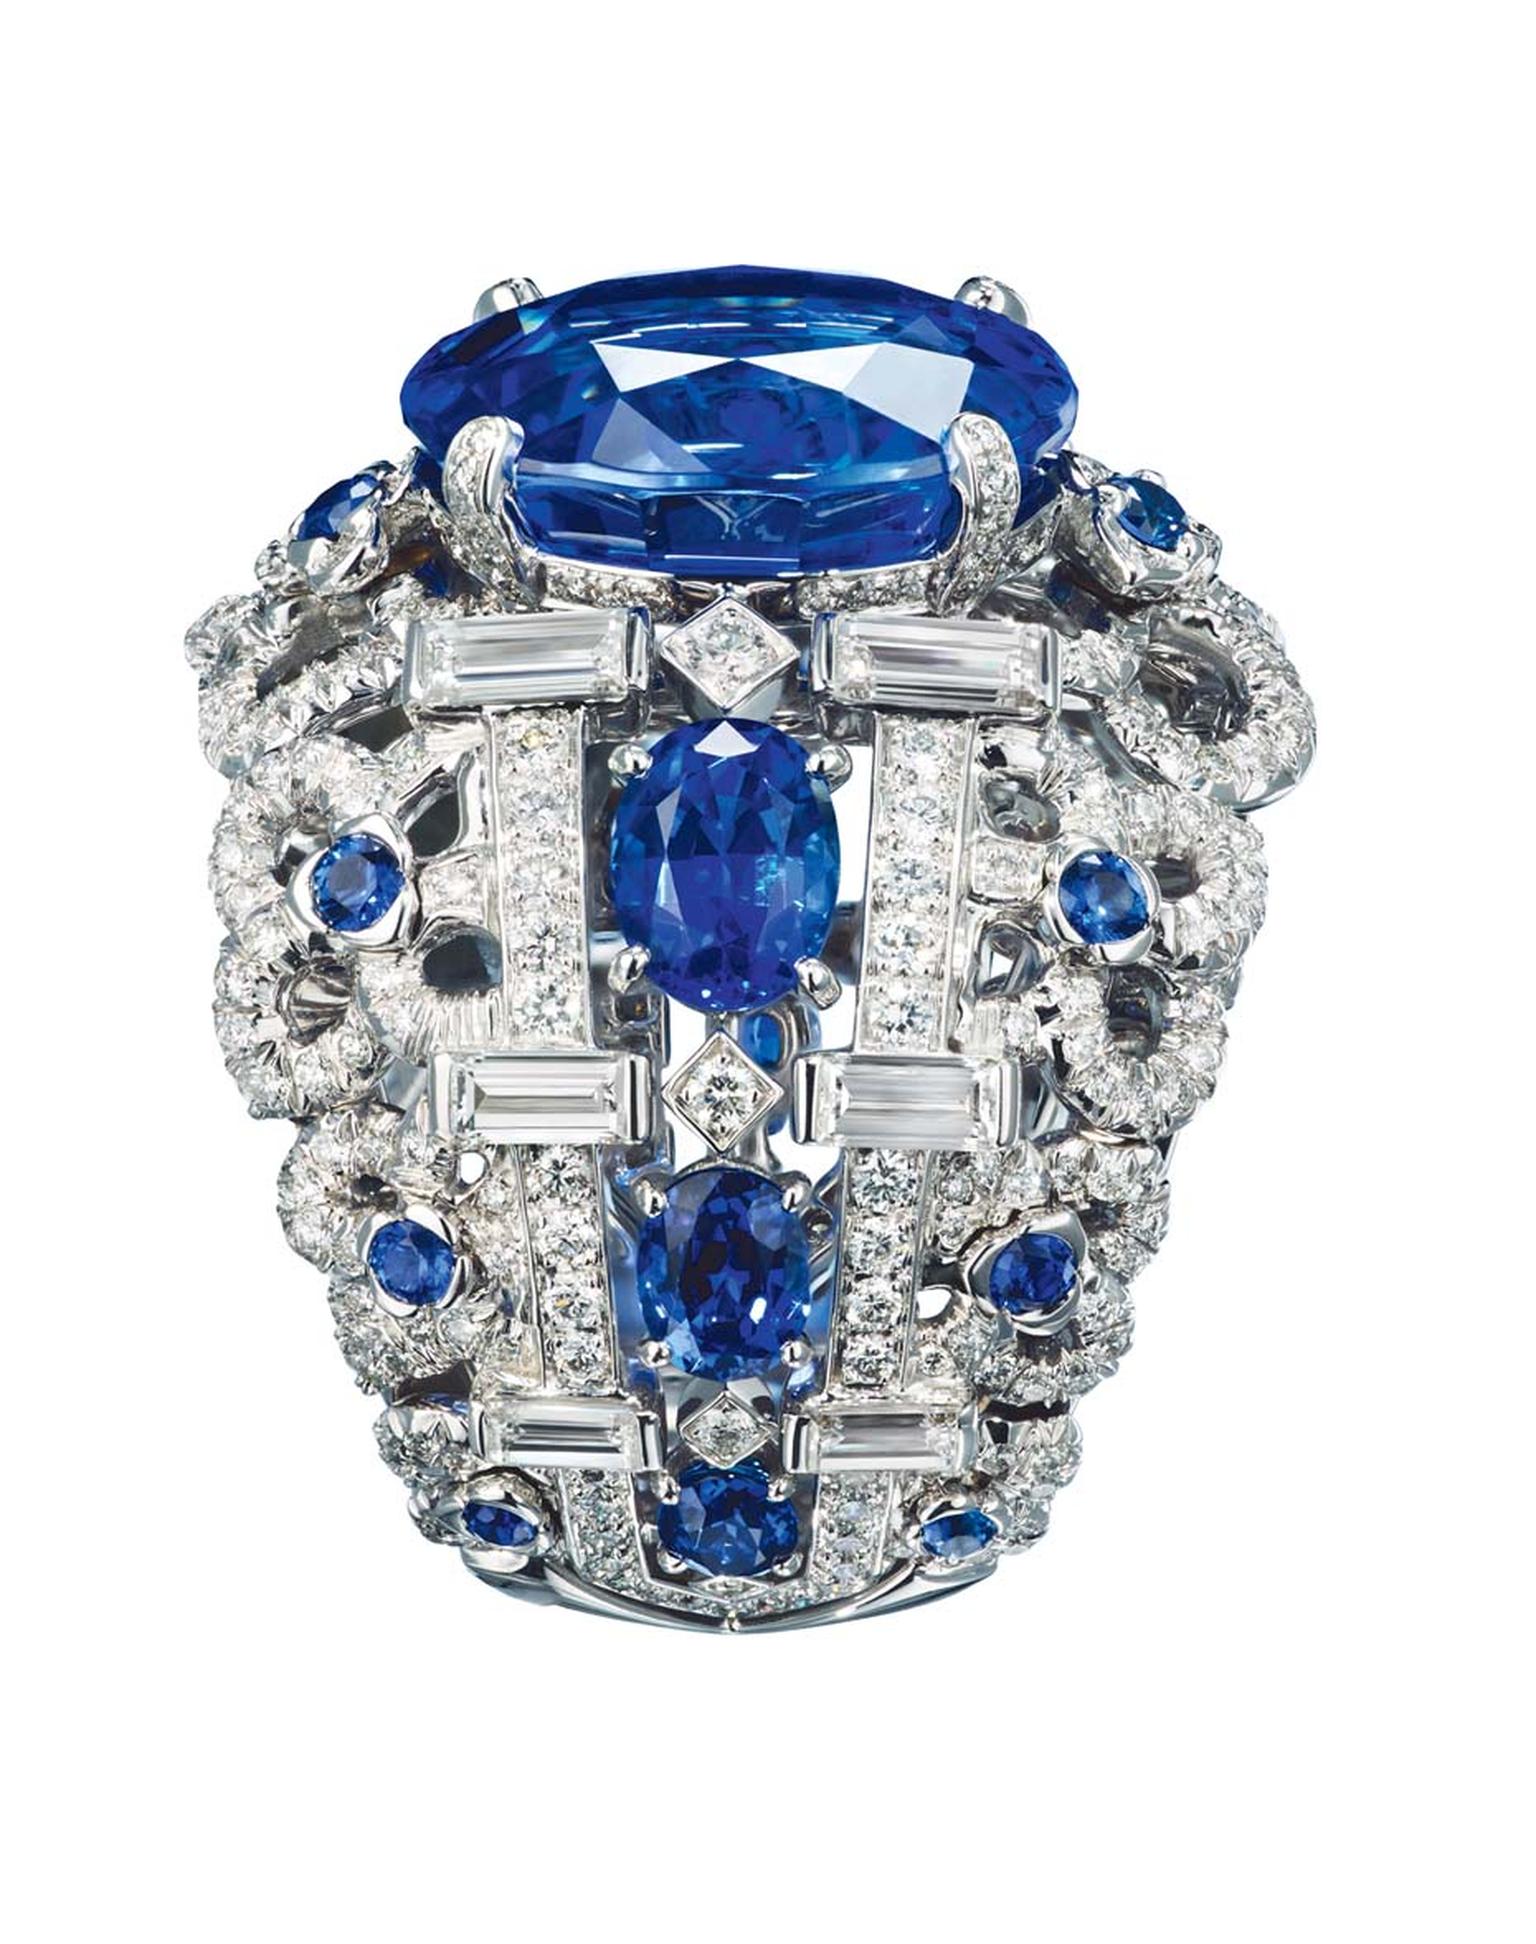 Chaumet Hortensia 18ct white gold ring, with brilliant, oval and baguette cut sapphires and diamonds and set with a 9.85ct oval-cut sapphire.